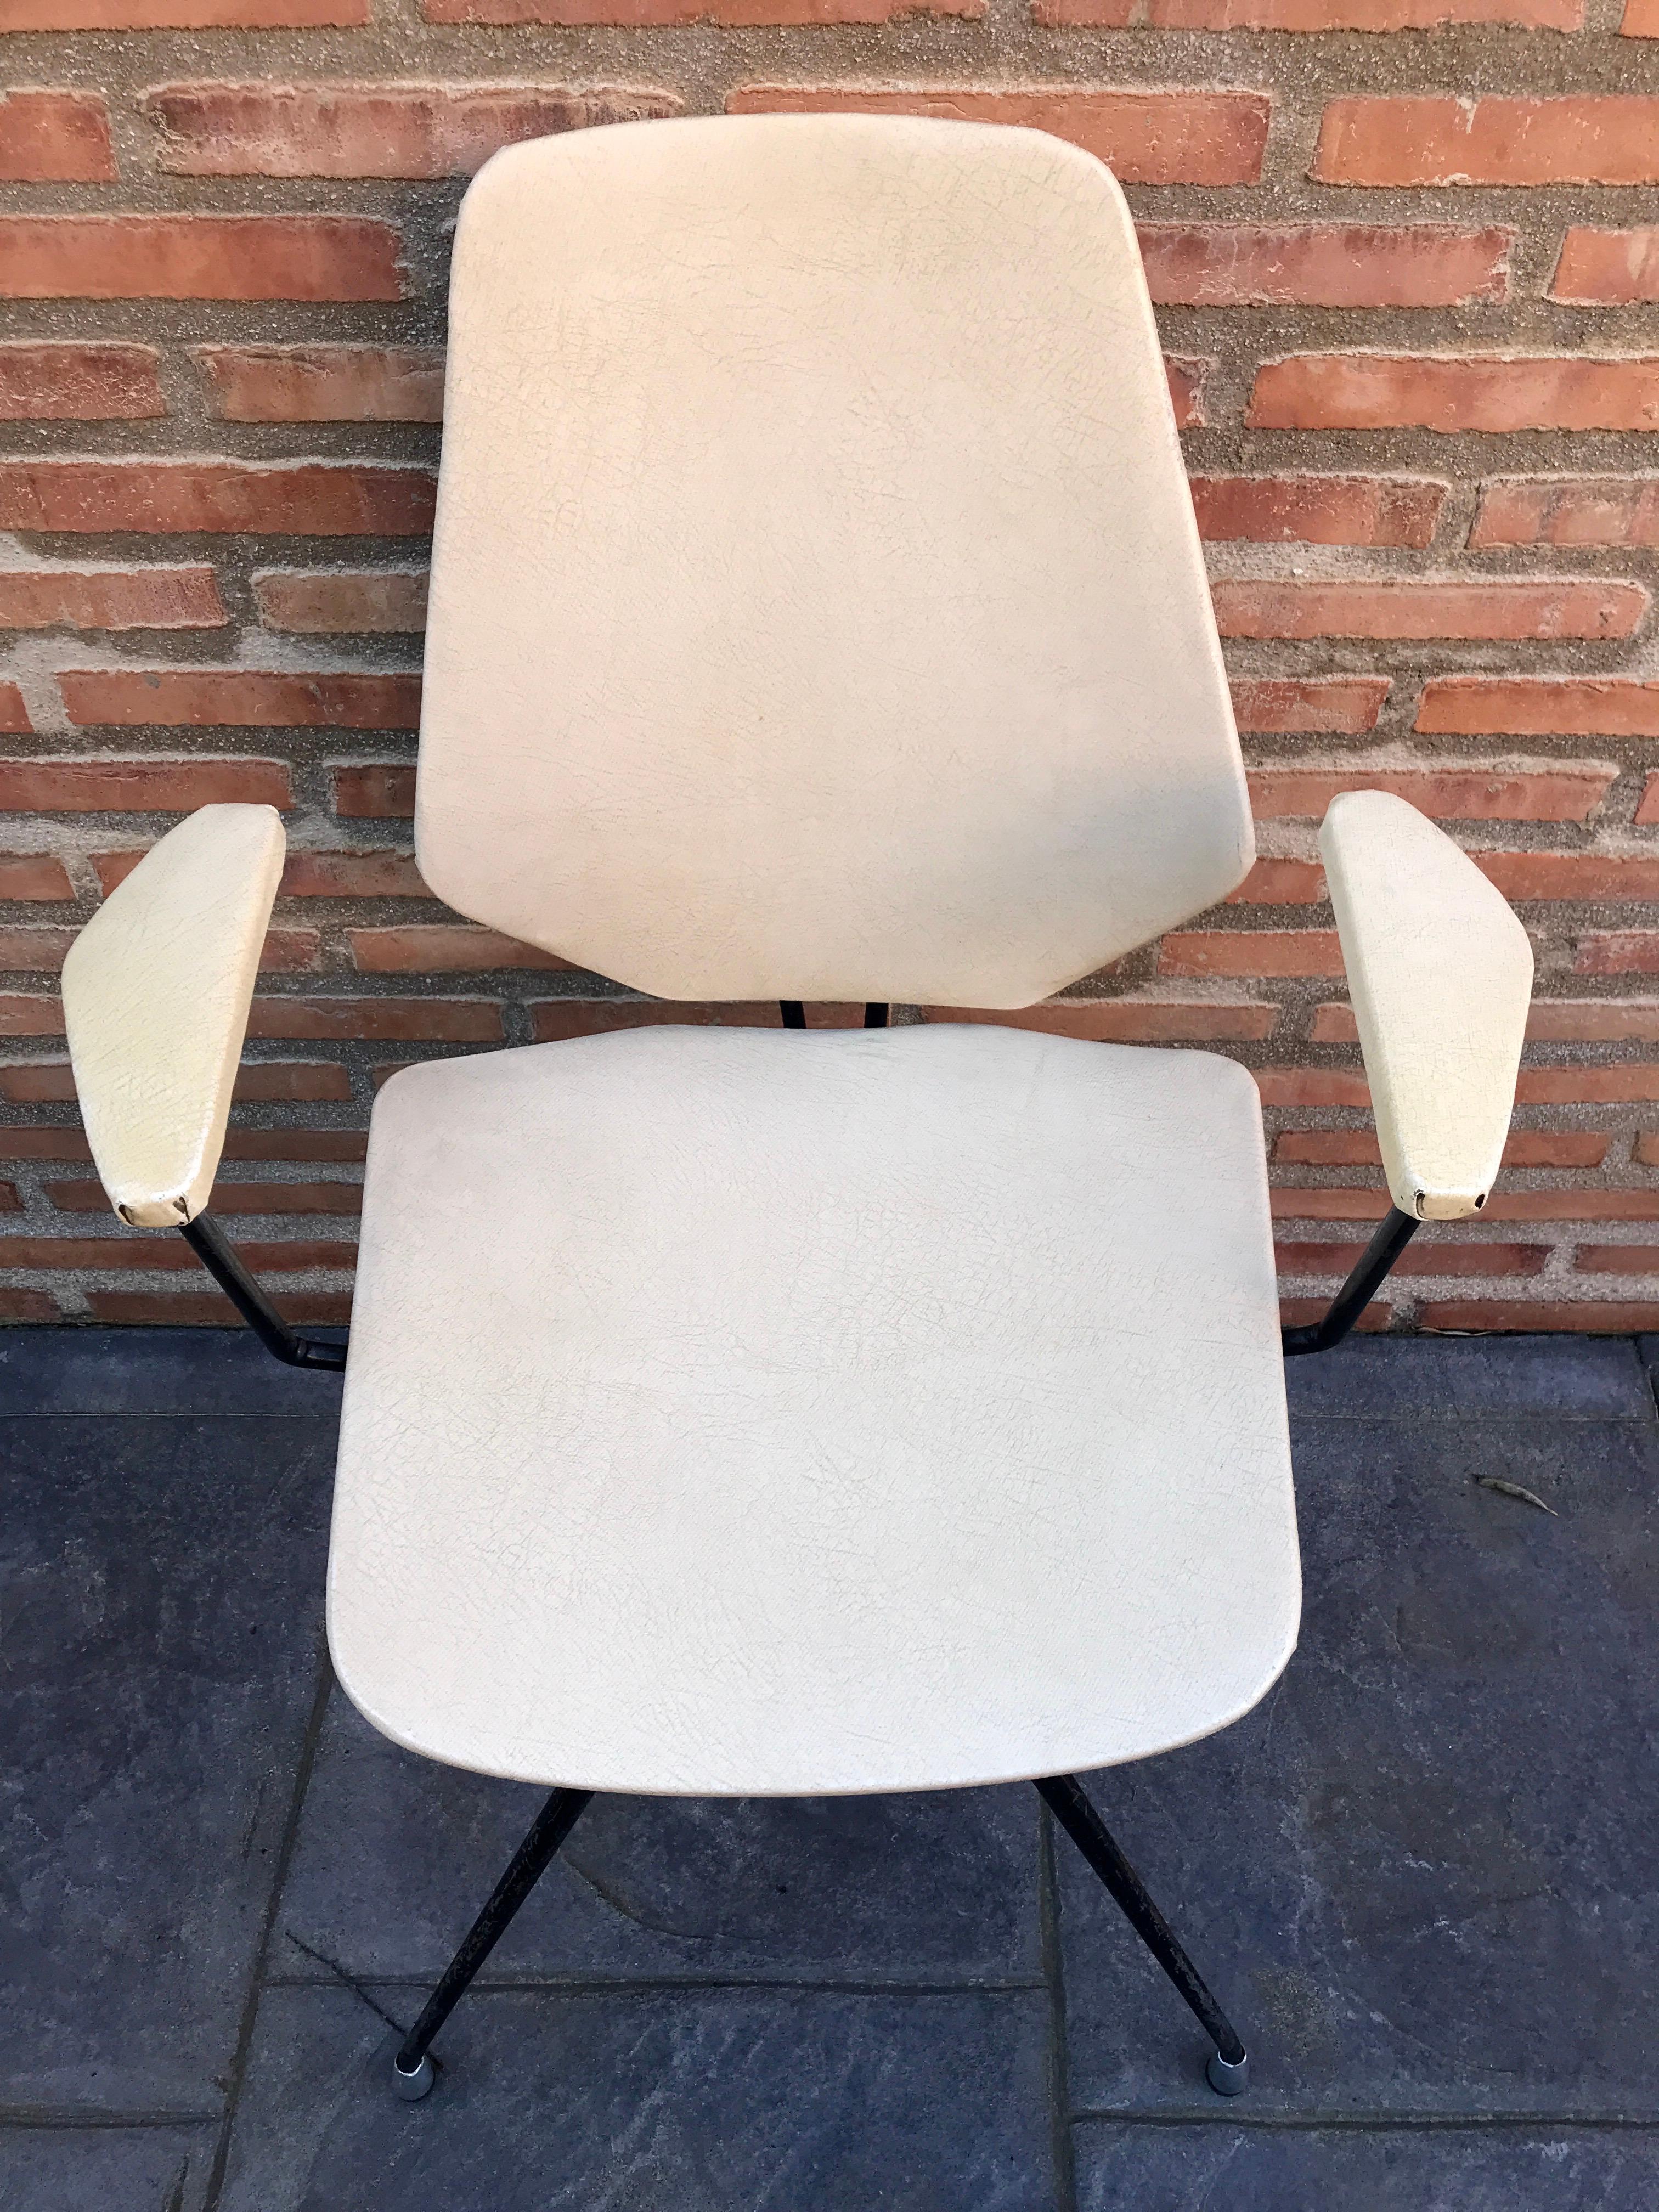 Italian Vintage Office or Desk Swivel Chair In Good Condition For Sale In Miami, FL